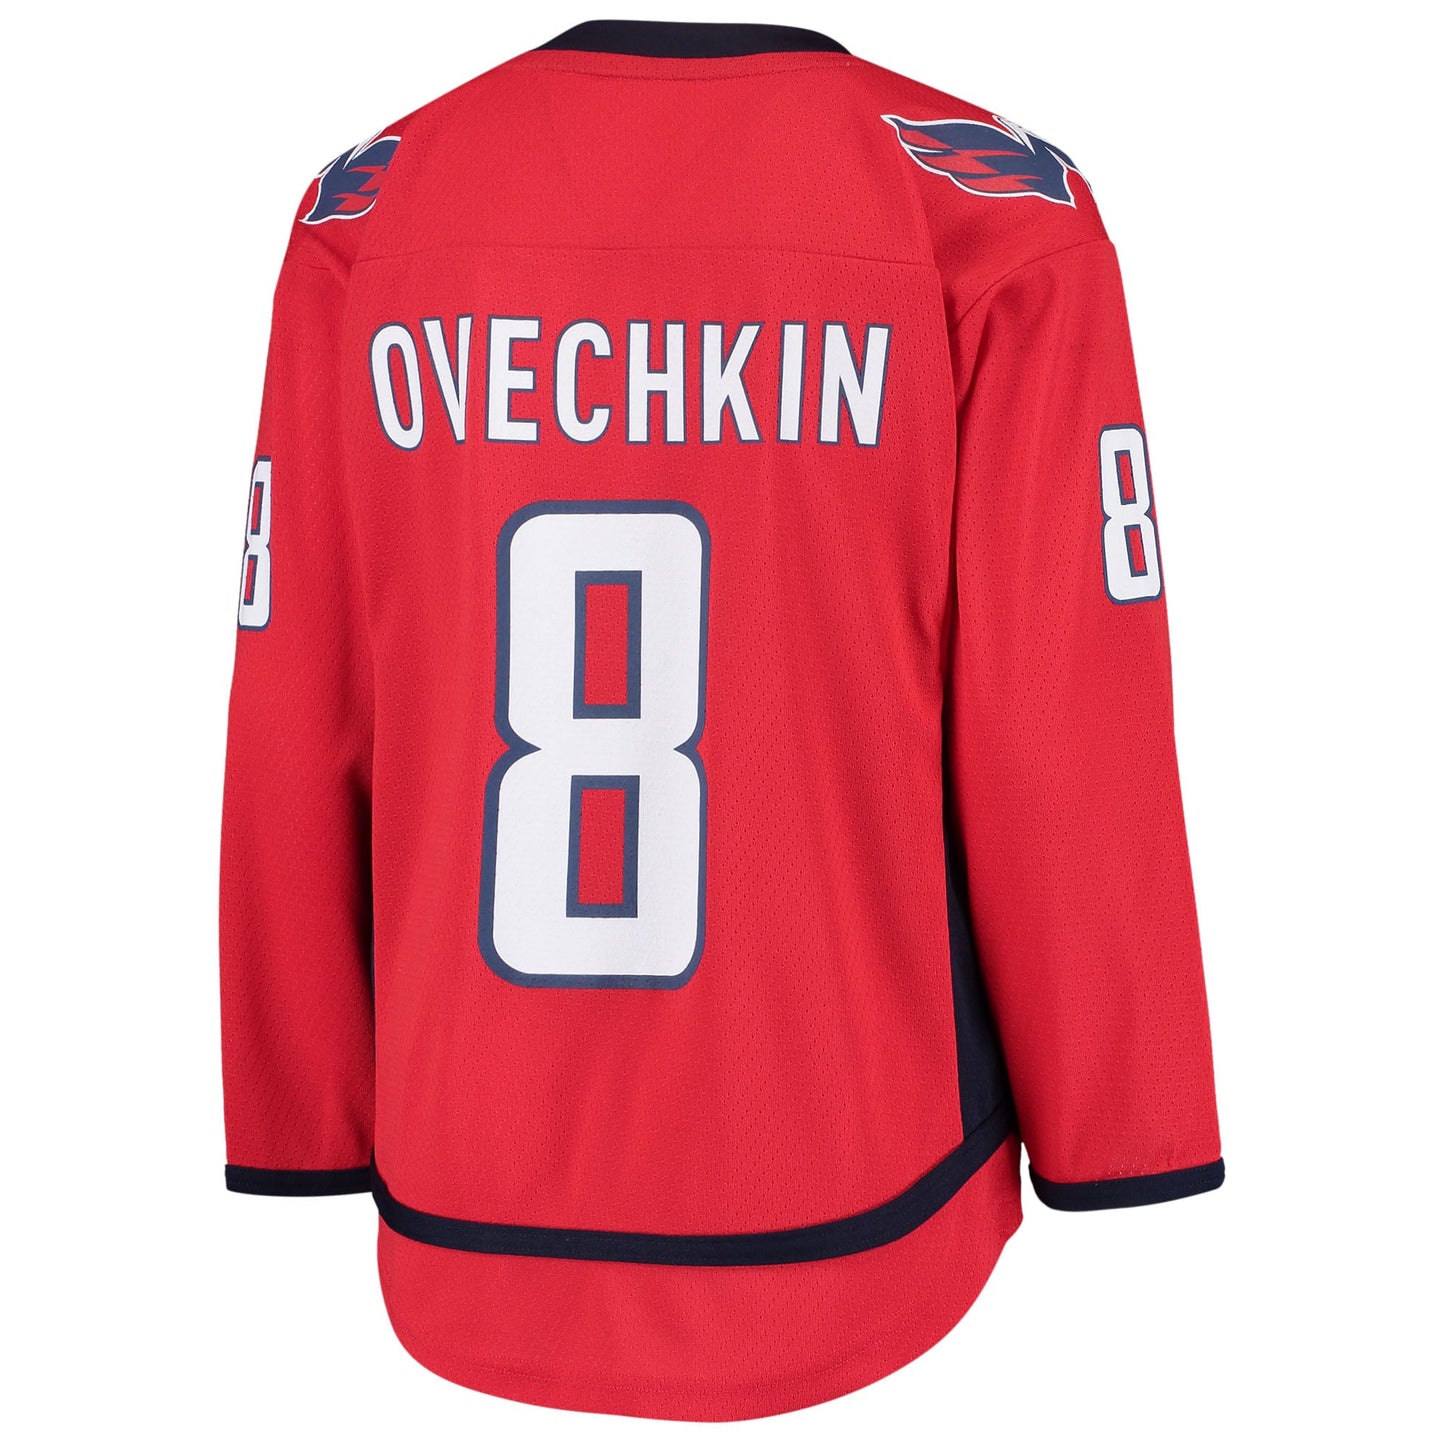 Alexander Ovechkin Washington Capitals Youth Home Replica Player Jersey - Red